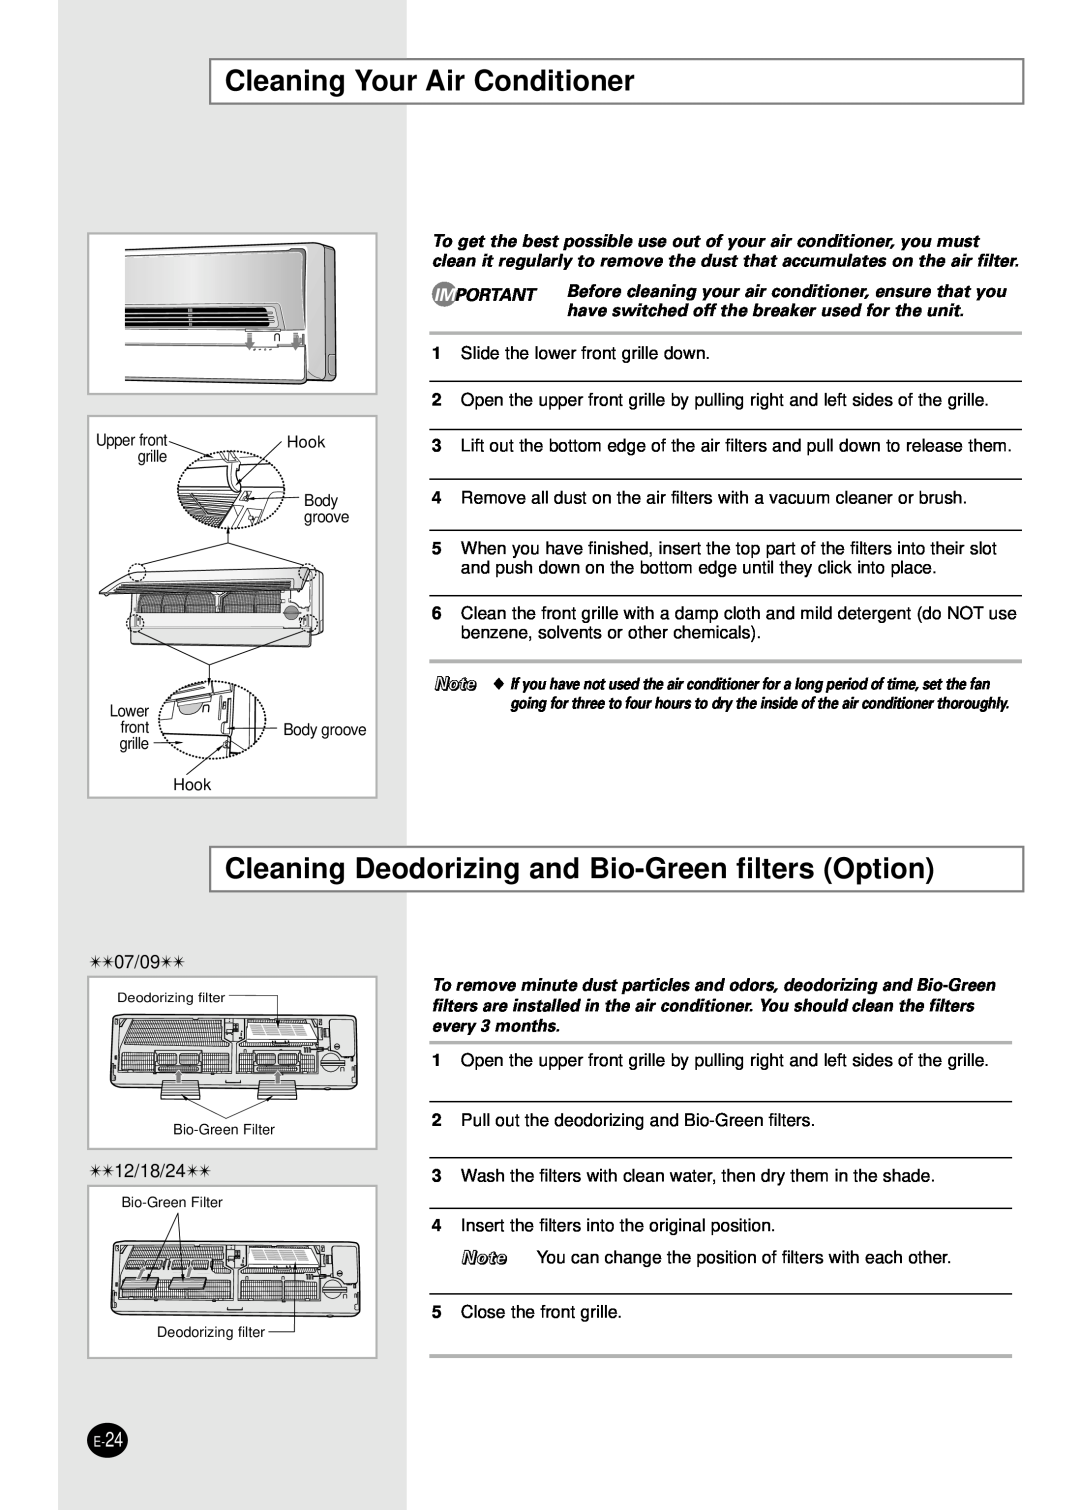 Samsung AQ07SBGE, SH24TS6 Cleaning Your Air Conditioner, Cleaning Deodorizing and Bio-Greenfilters Option, 07/09, 12/18/24 